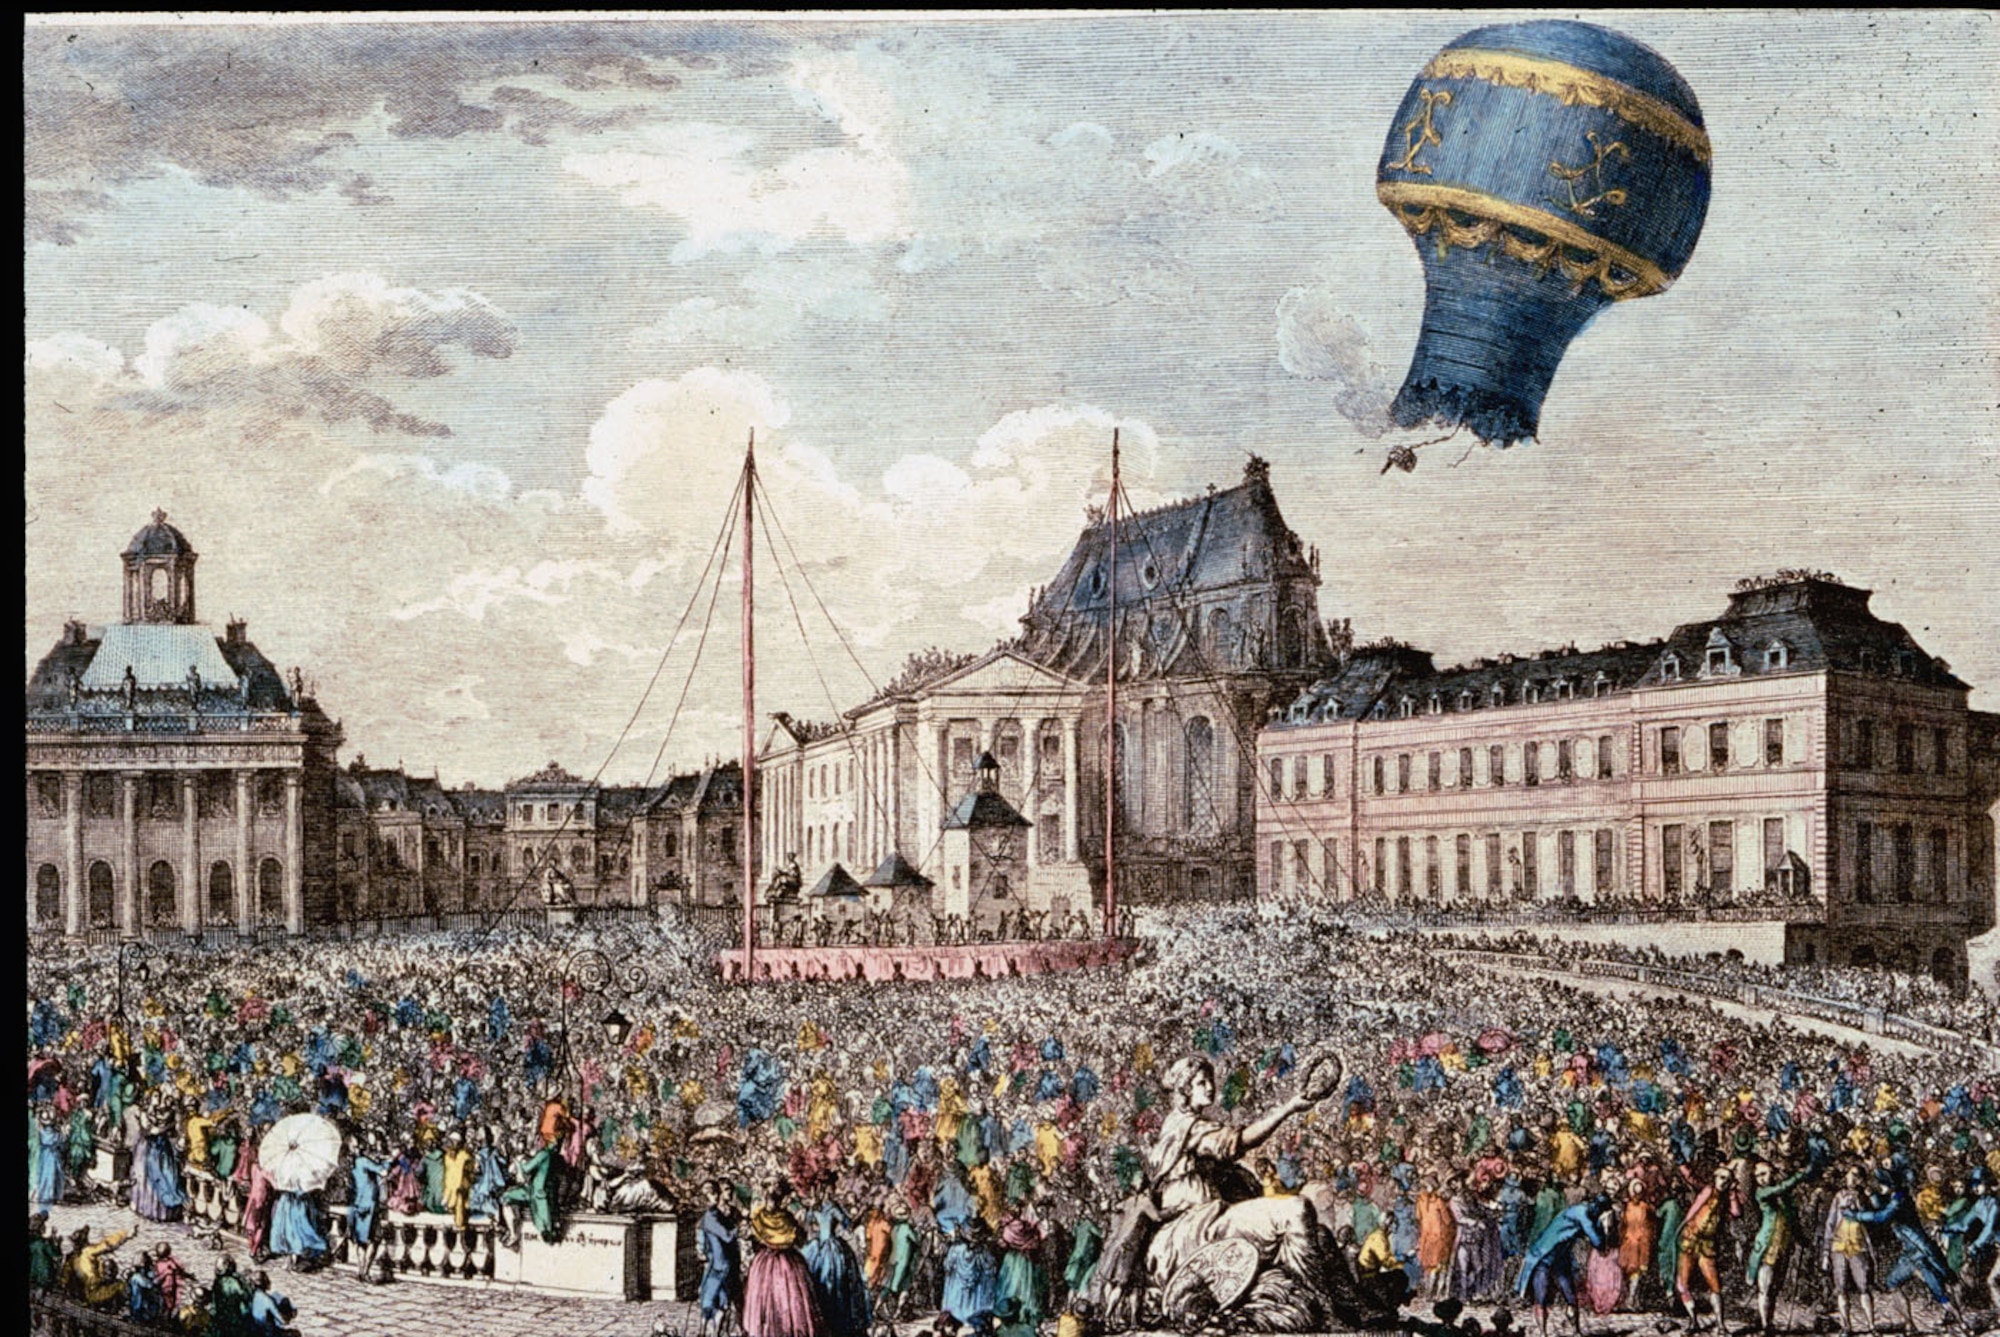 This item from the Gimbel Collection depicts one of the first balloon flights over Marseilles, France, in 1783. The balloon is named a Montgolfiere after its inventors, French paper makers Joseph and Jacques Montgolfier. Its first flight, over Annonay, France, reached an altitude of 6,562 feet. (U.S. Air Force photo)